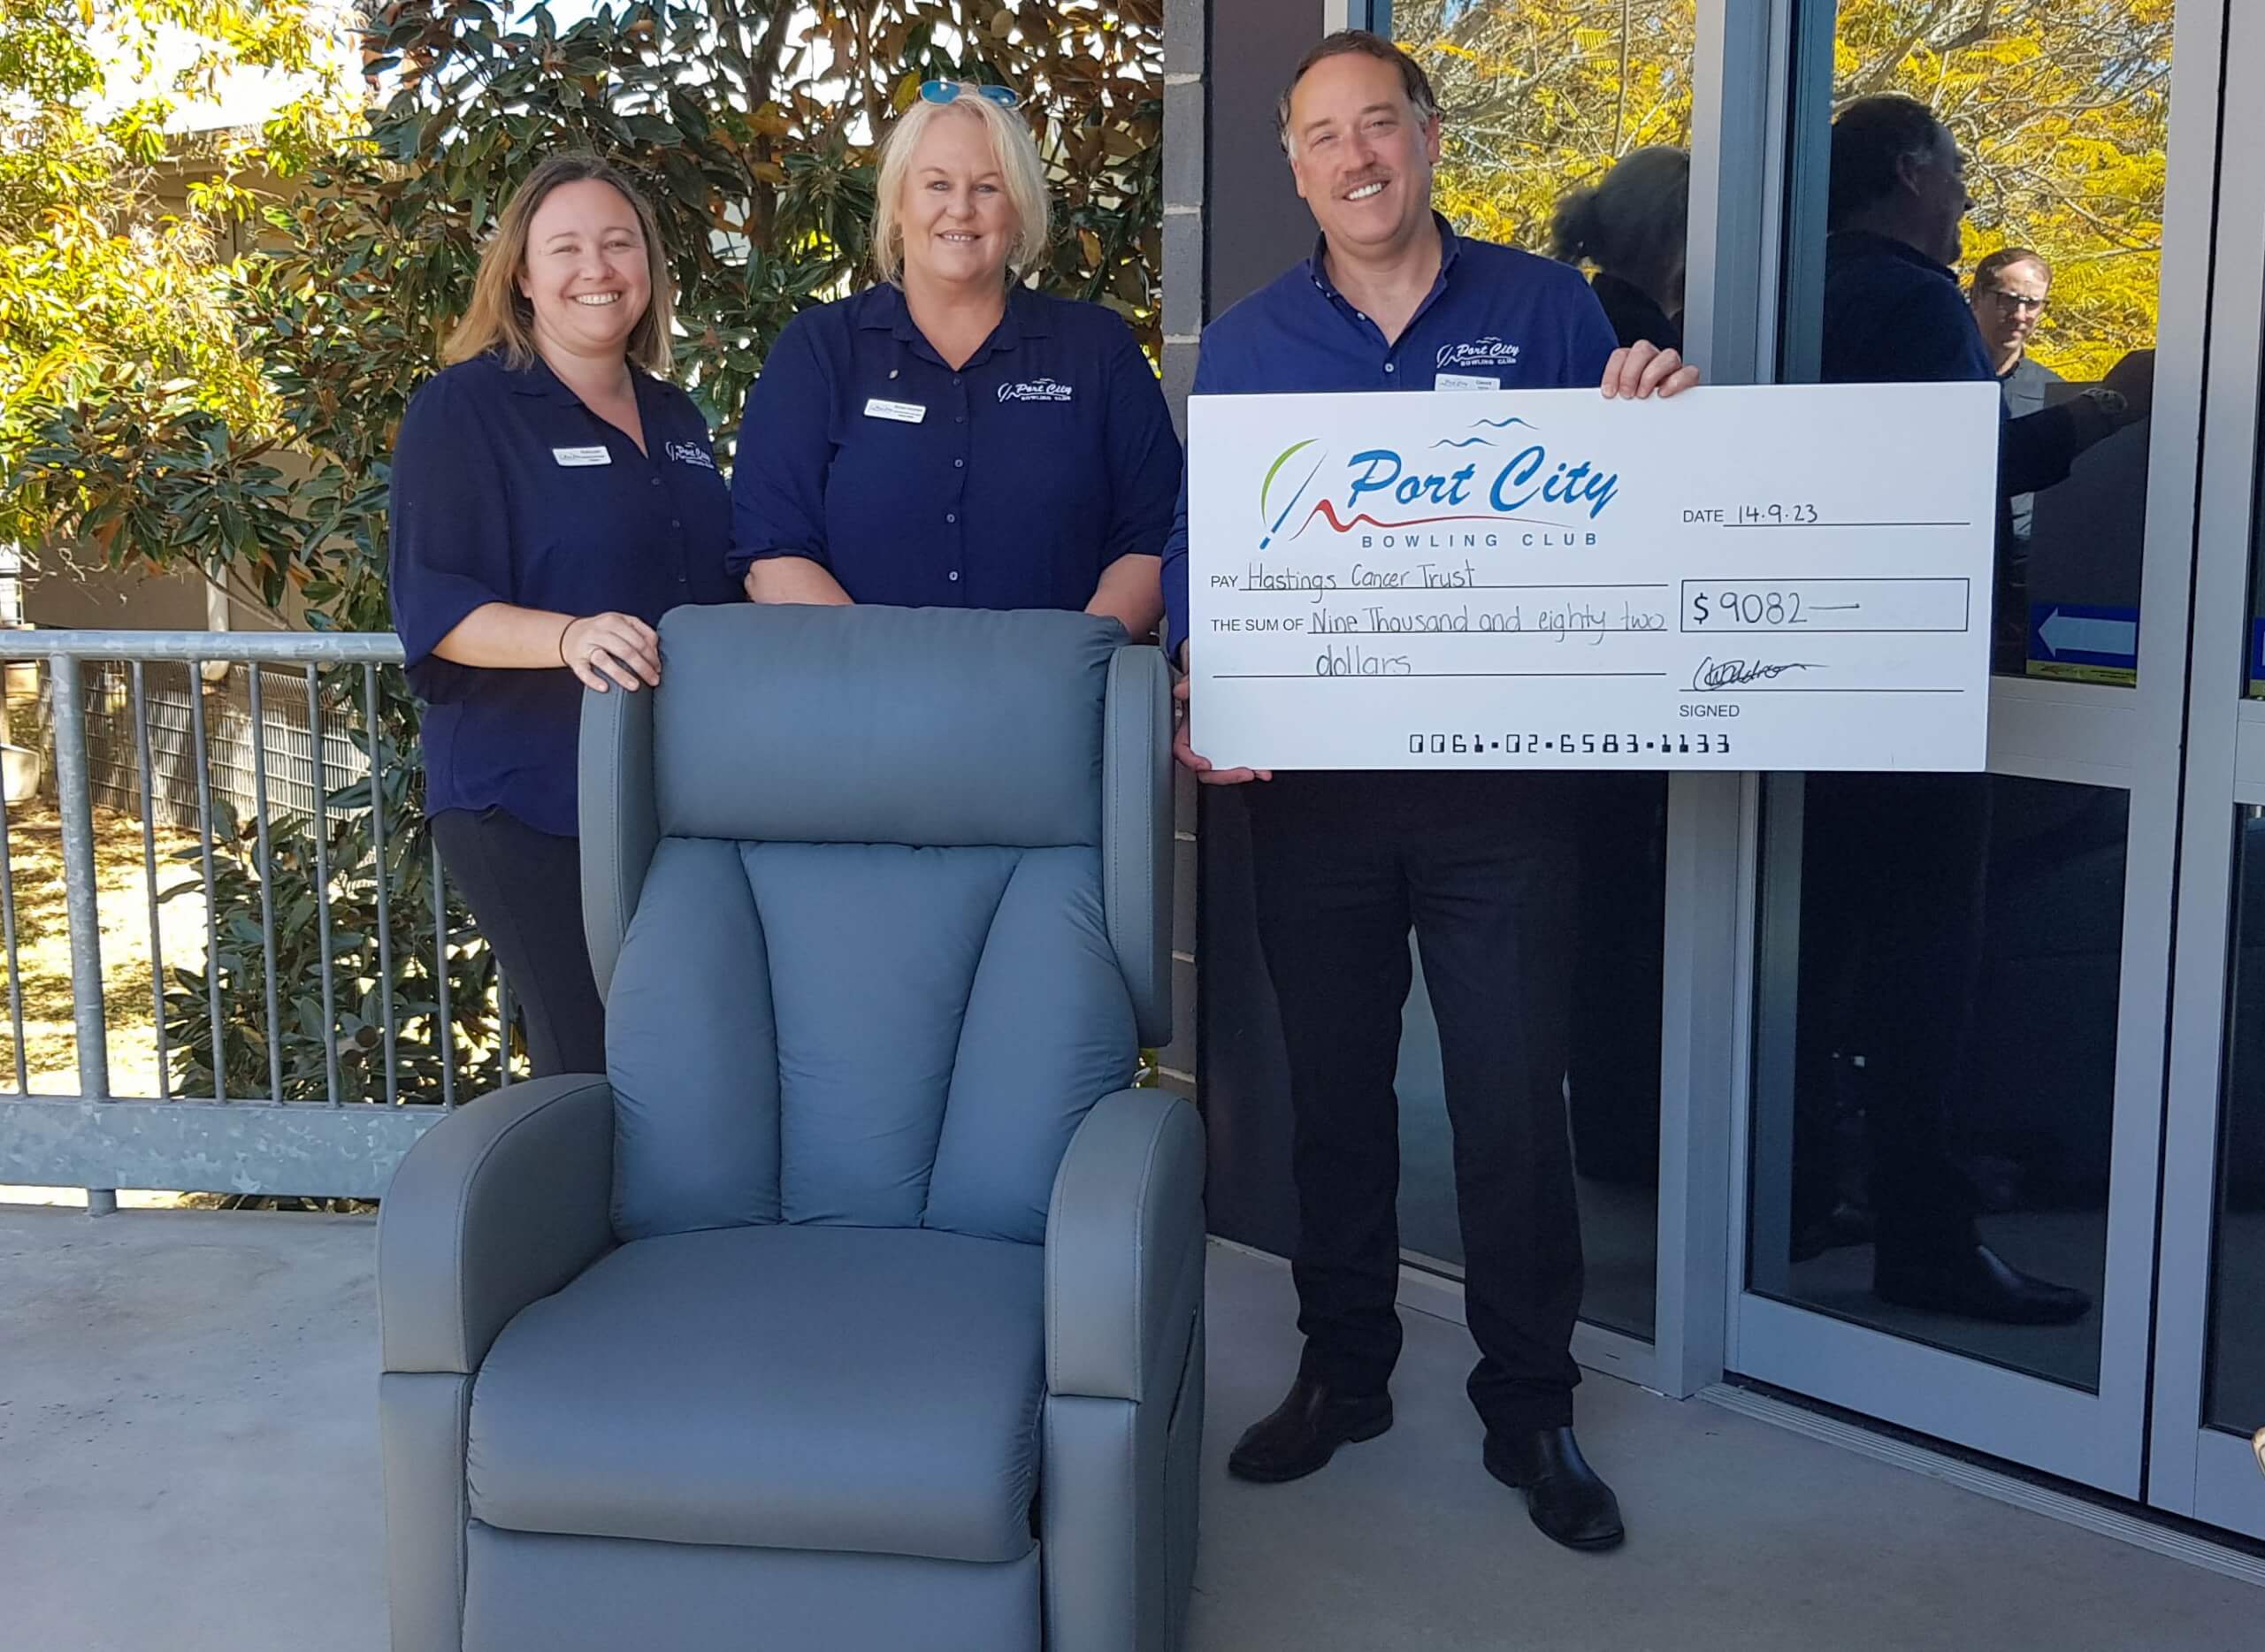 Port City Bowling Club has partnered with Hastings Cancer Trust to deliver four comfortable recliners to Wauchope District Memorial Hospital’s Palliative Care Unit. image